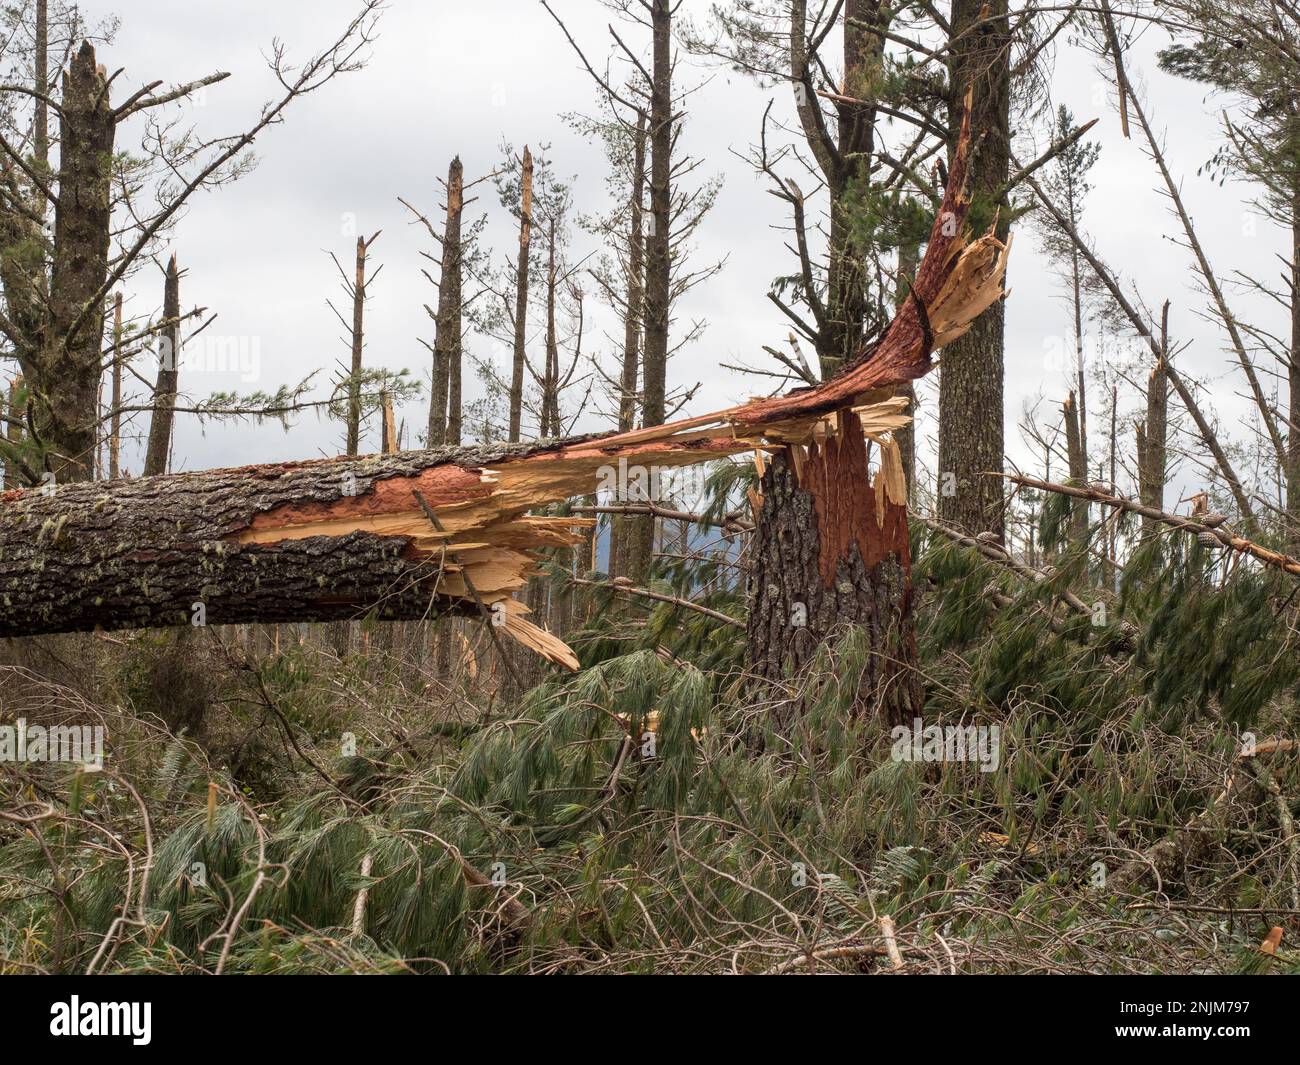 A close view of a snapped pine tree trunk in a forest after storm cyclone Gabrielle.Almost every tree has been snapped by severe high winds.Weather Stock Photo